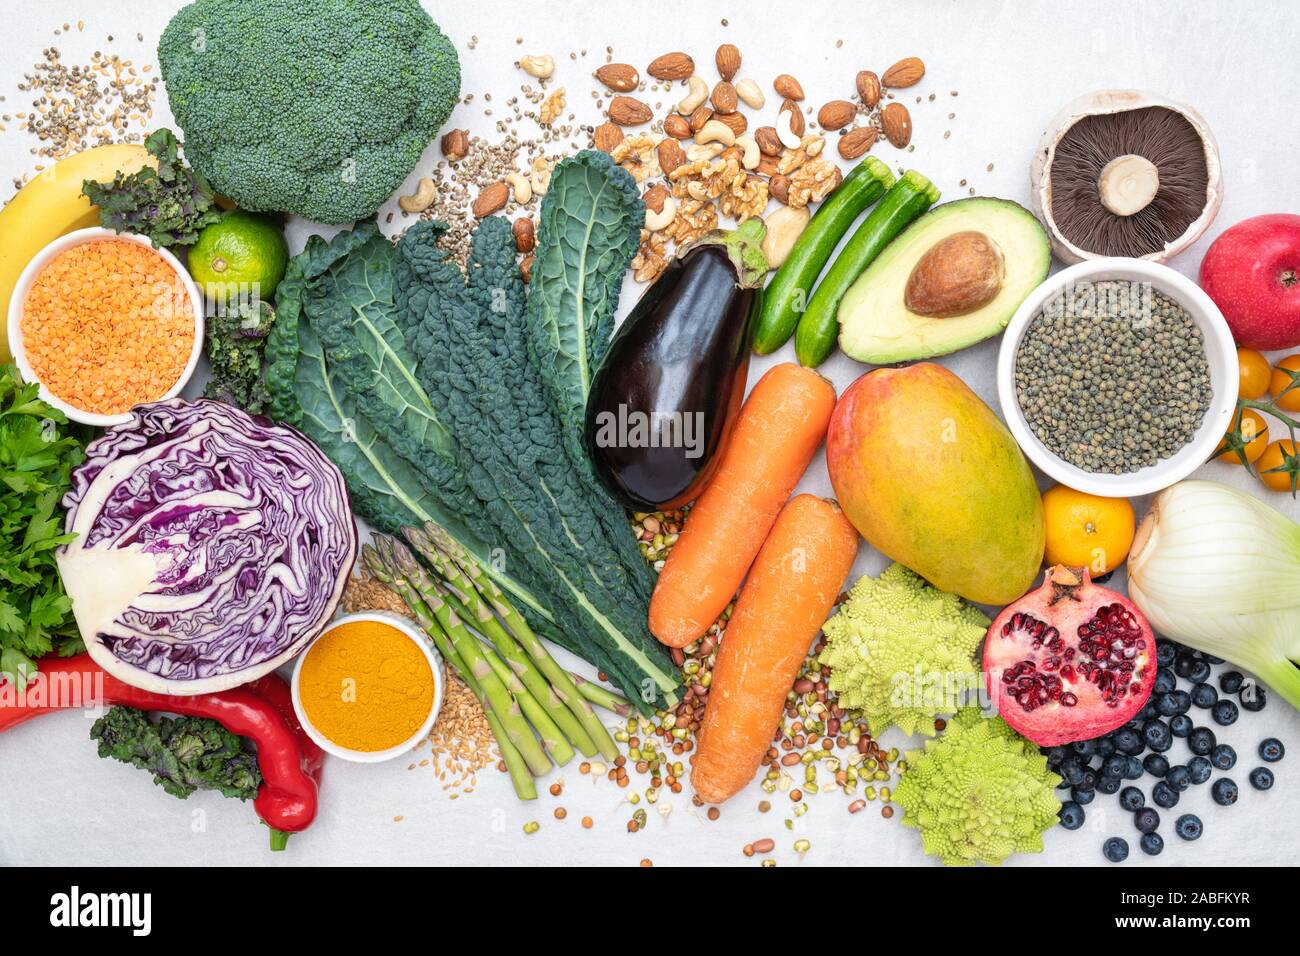 Vegan. Fruit vegetables lentils spices herbs nuts and seeds on a white slate background Stock Photo